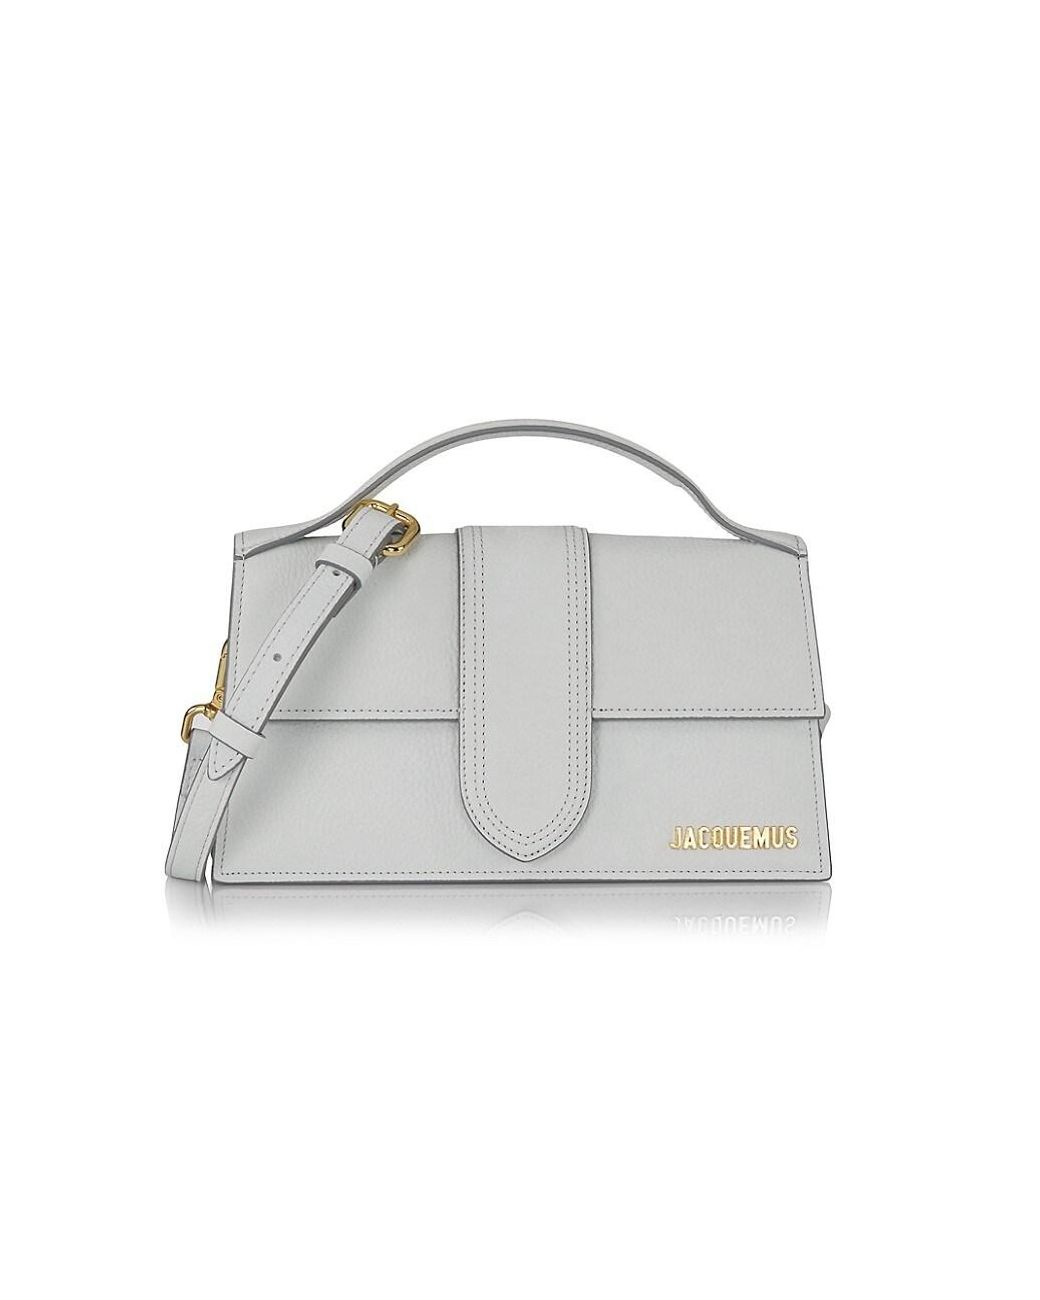 Jacquemus Le Grand Bambino Leather Top Handle Bag in Light Grey (Gray ...